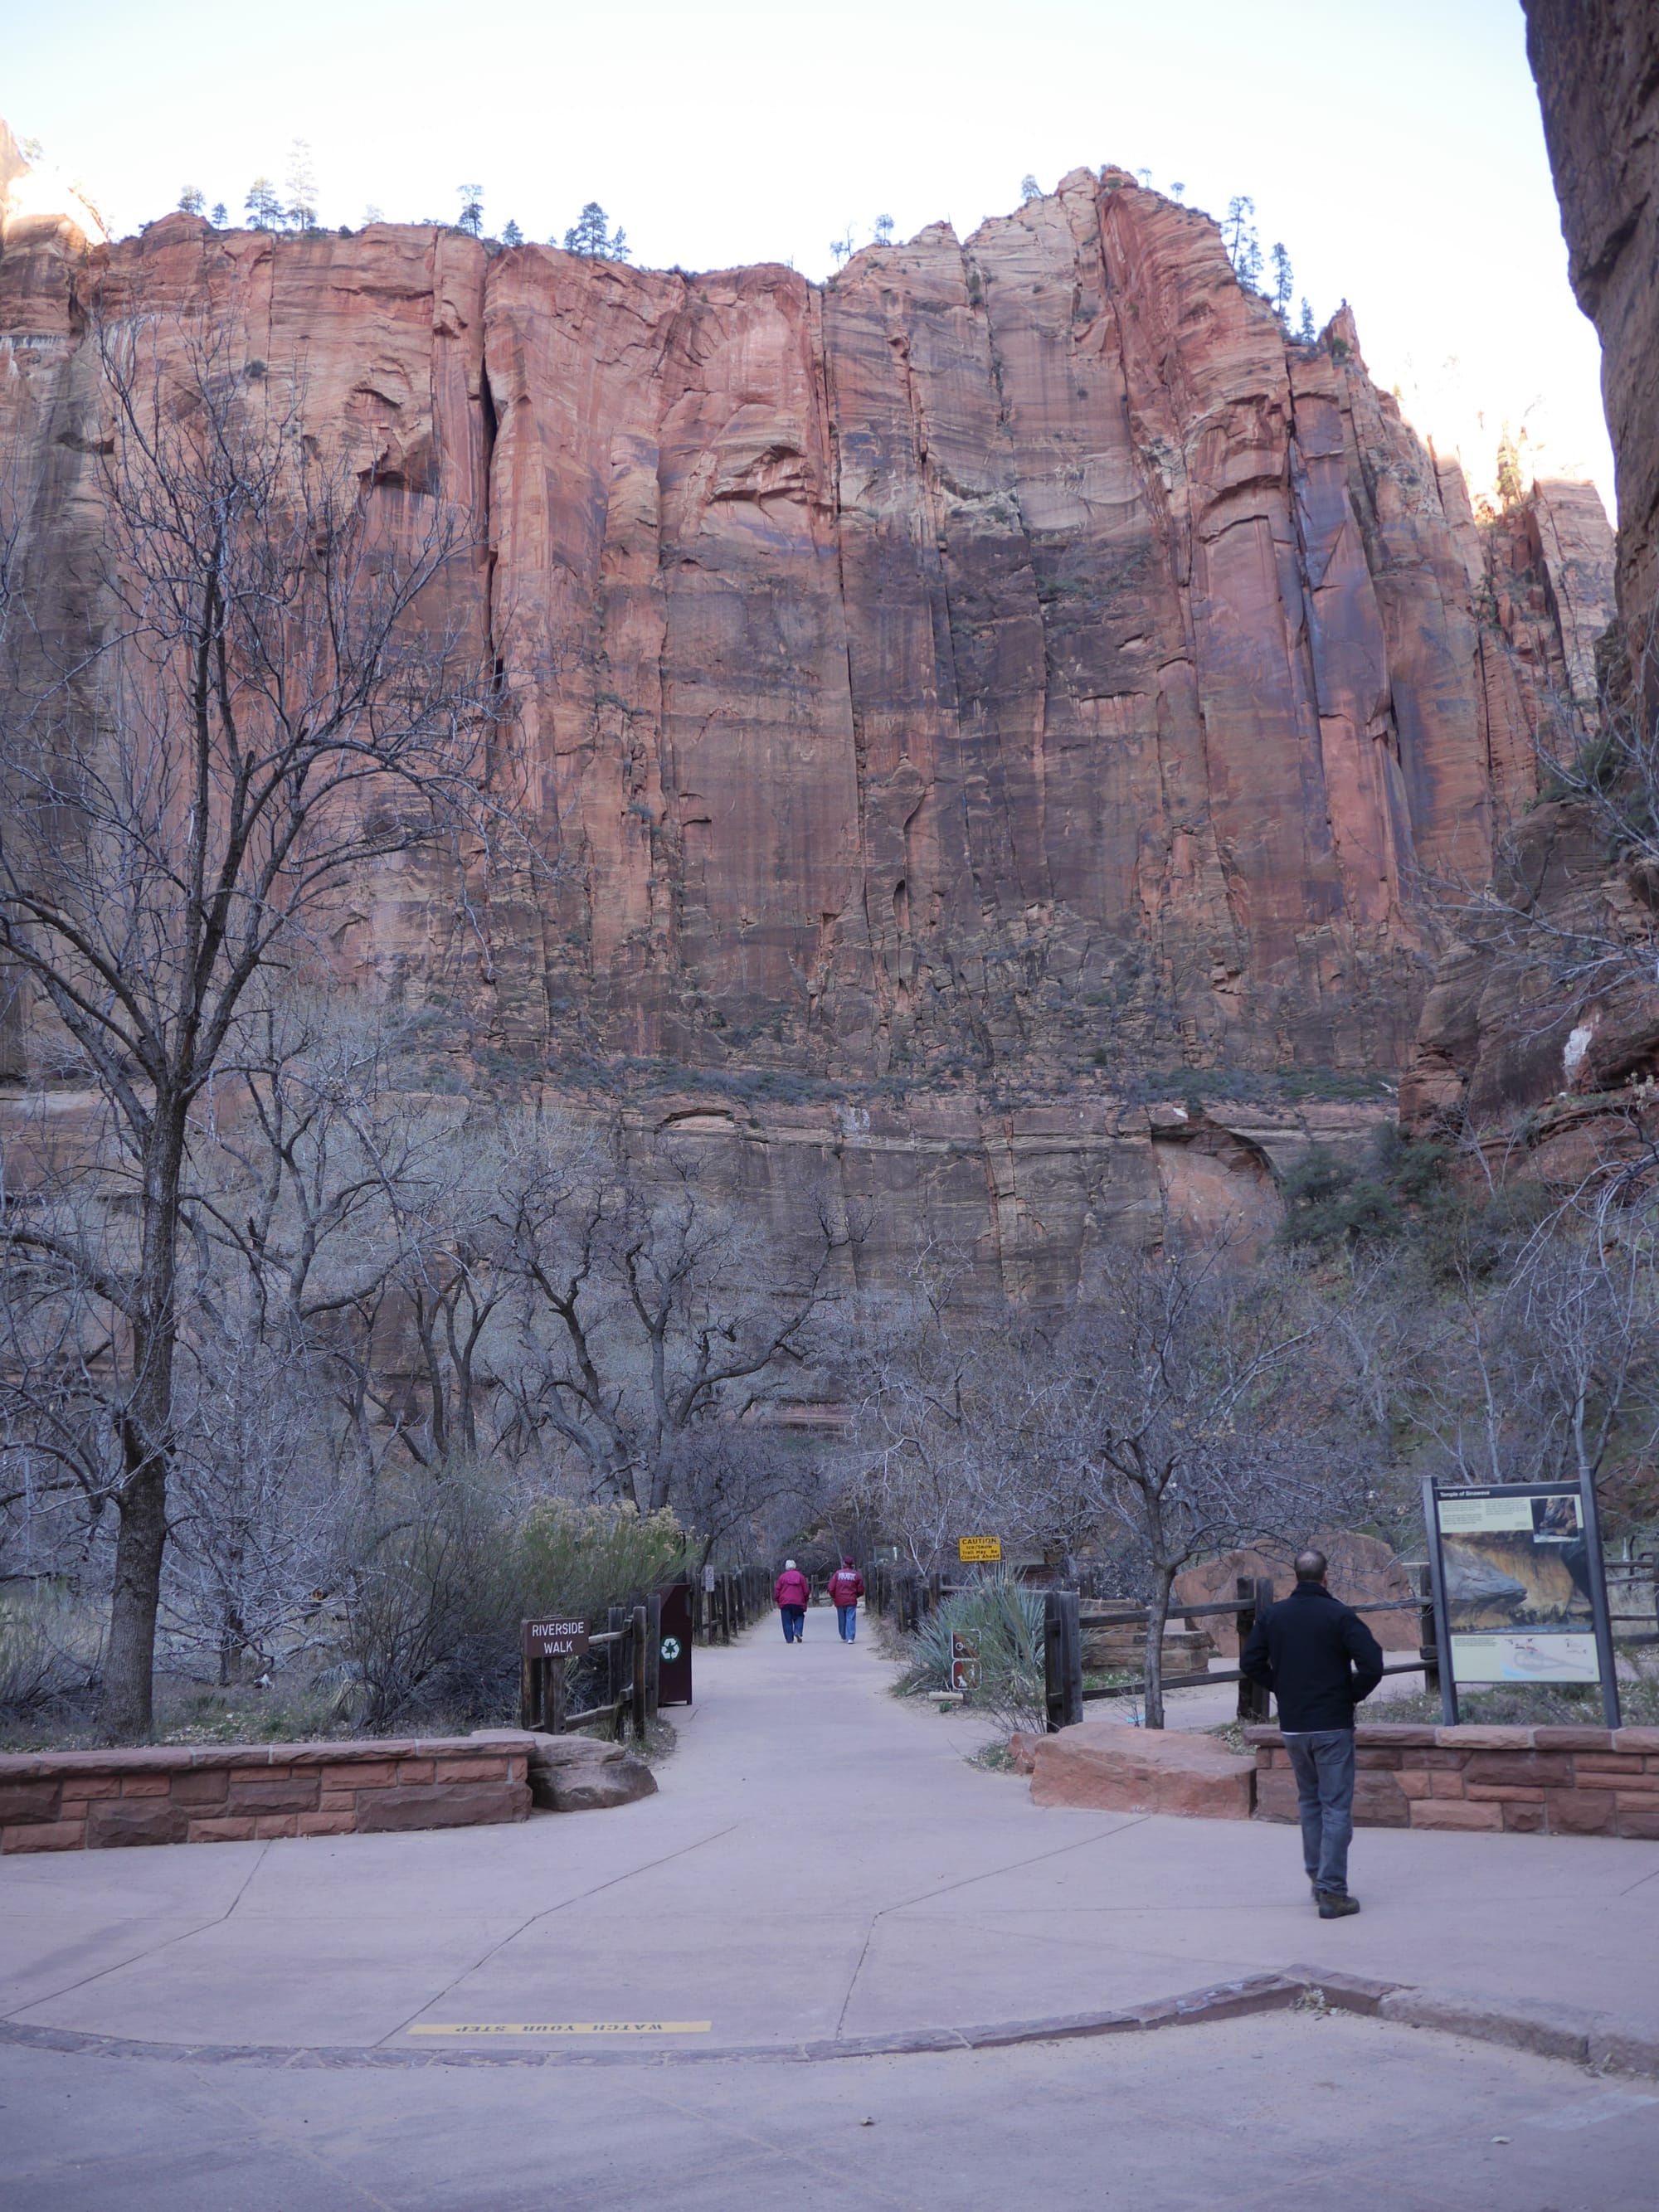 Photo by Author — The Riverside Trail, Zion National Park, Utah